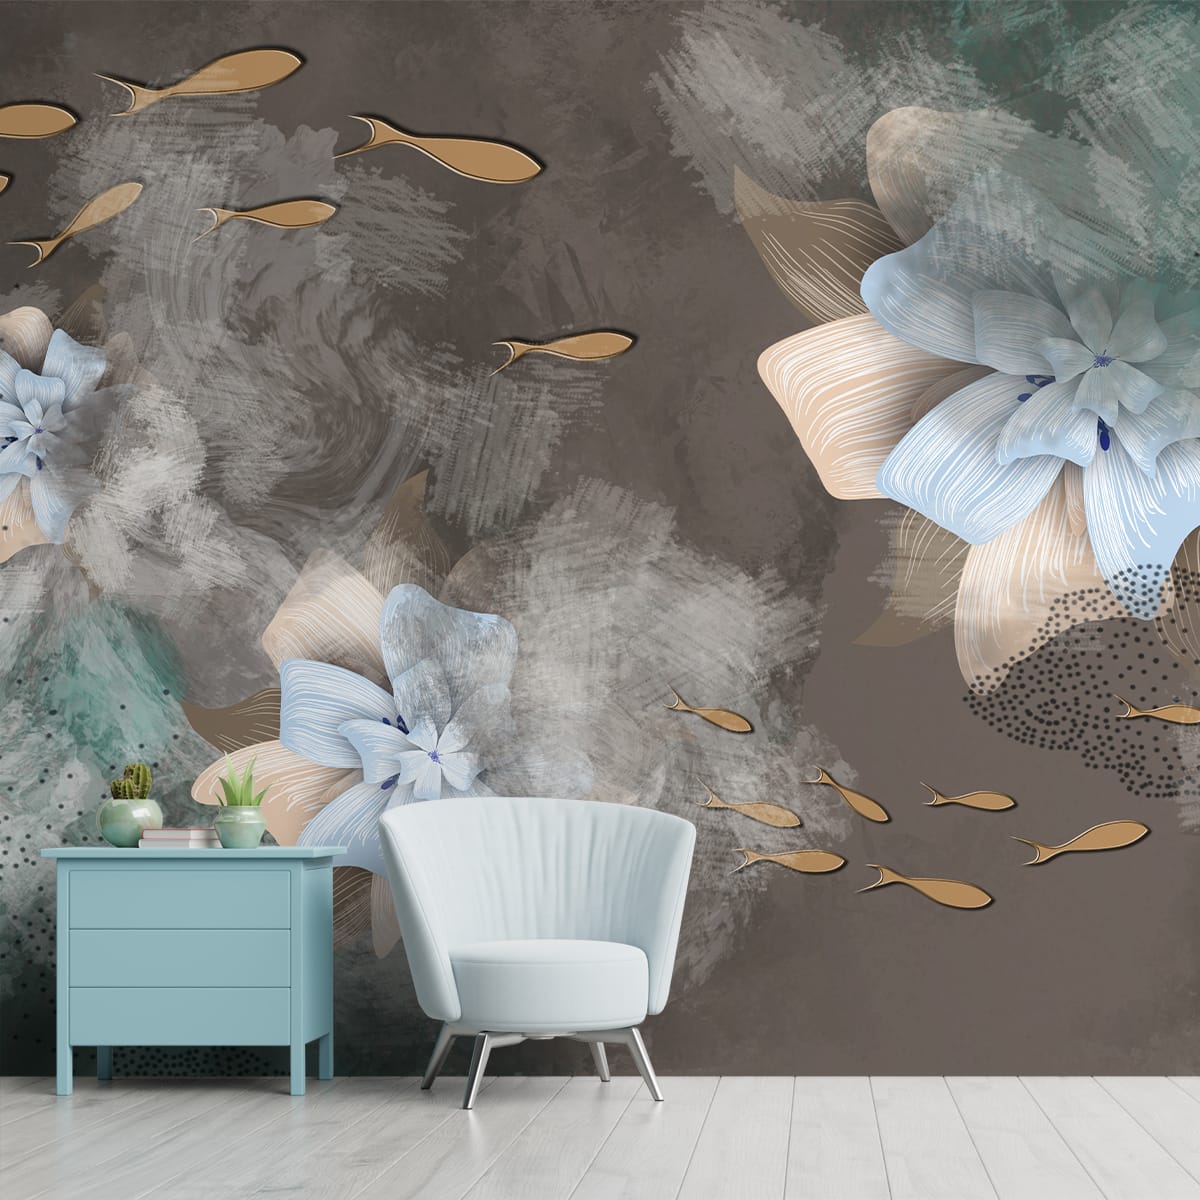 Love Wallpaper? Buy Online with FREE UK Delivery